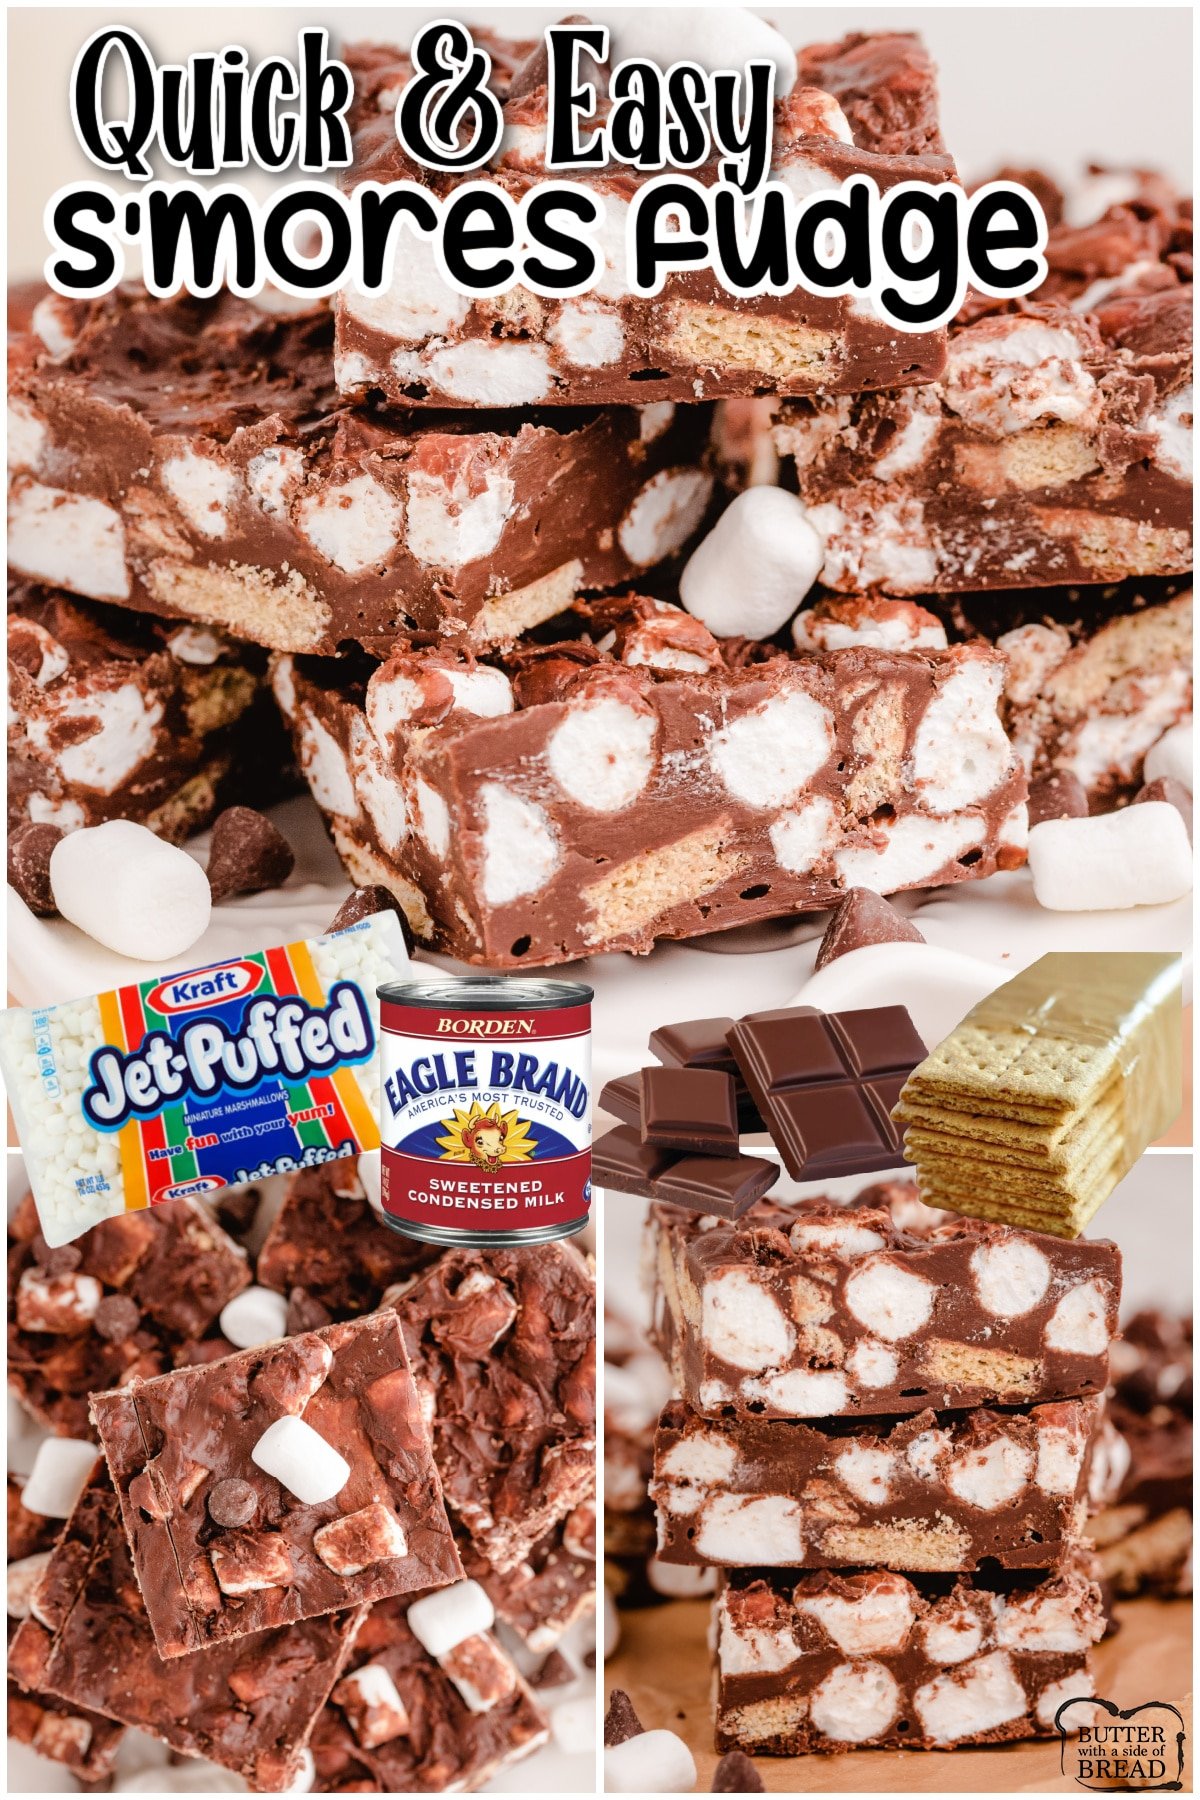 S'mores Fudge is an easy 5-ingredient fudge made with your favorite s'mores flavors! Chocolate, marshmallow and graham cracker wrapped in a smooth & creamy decadent fudge. 